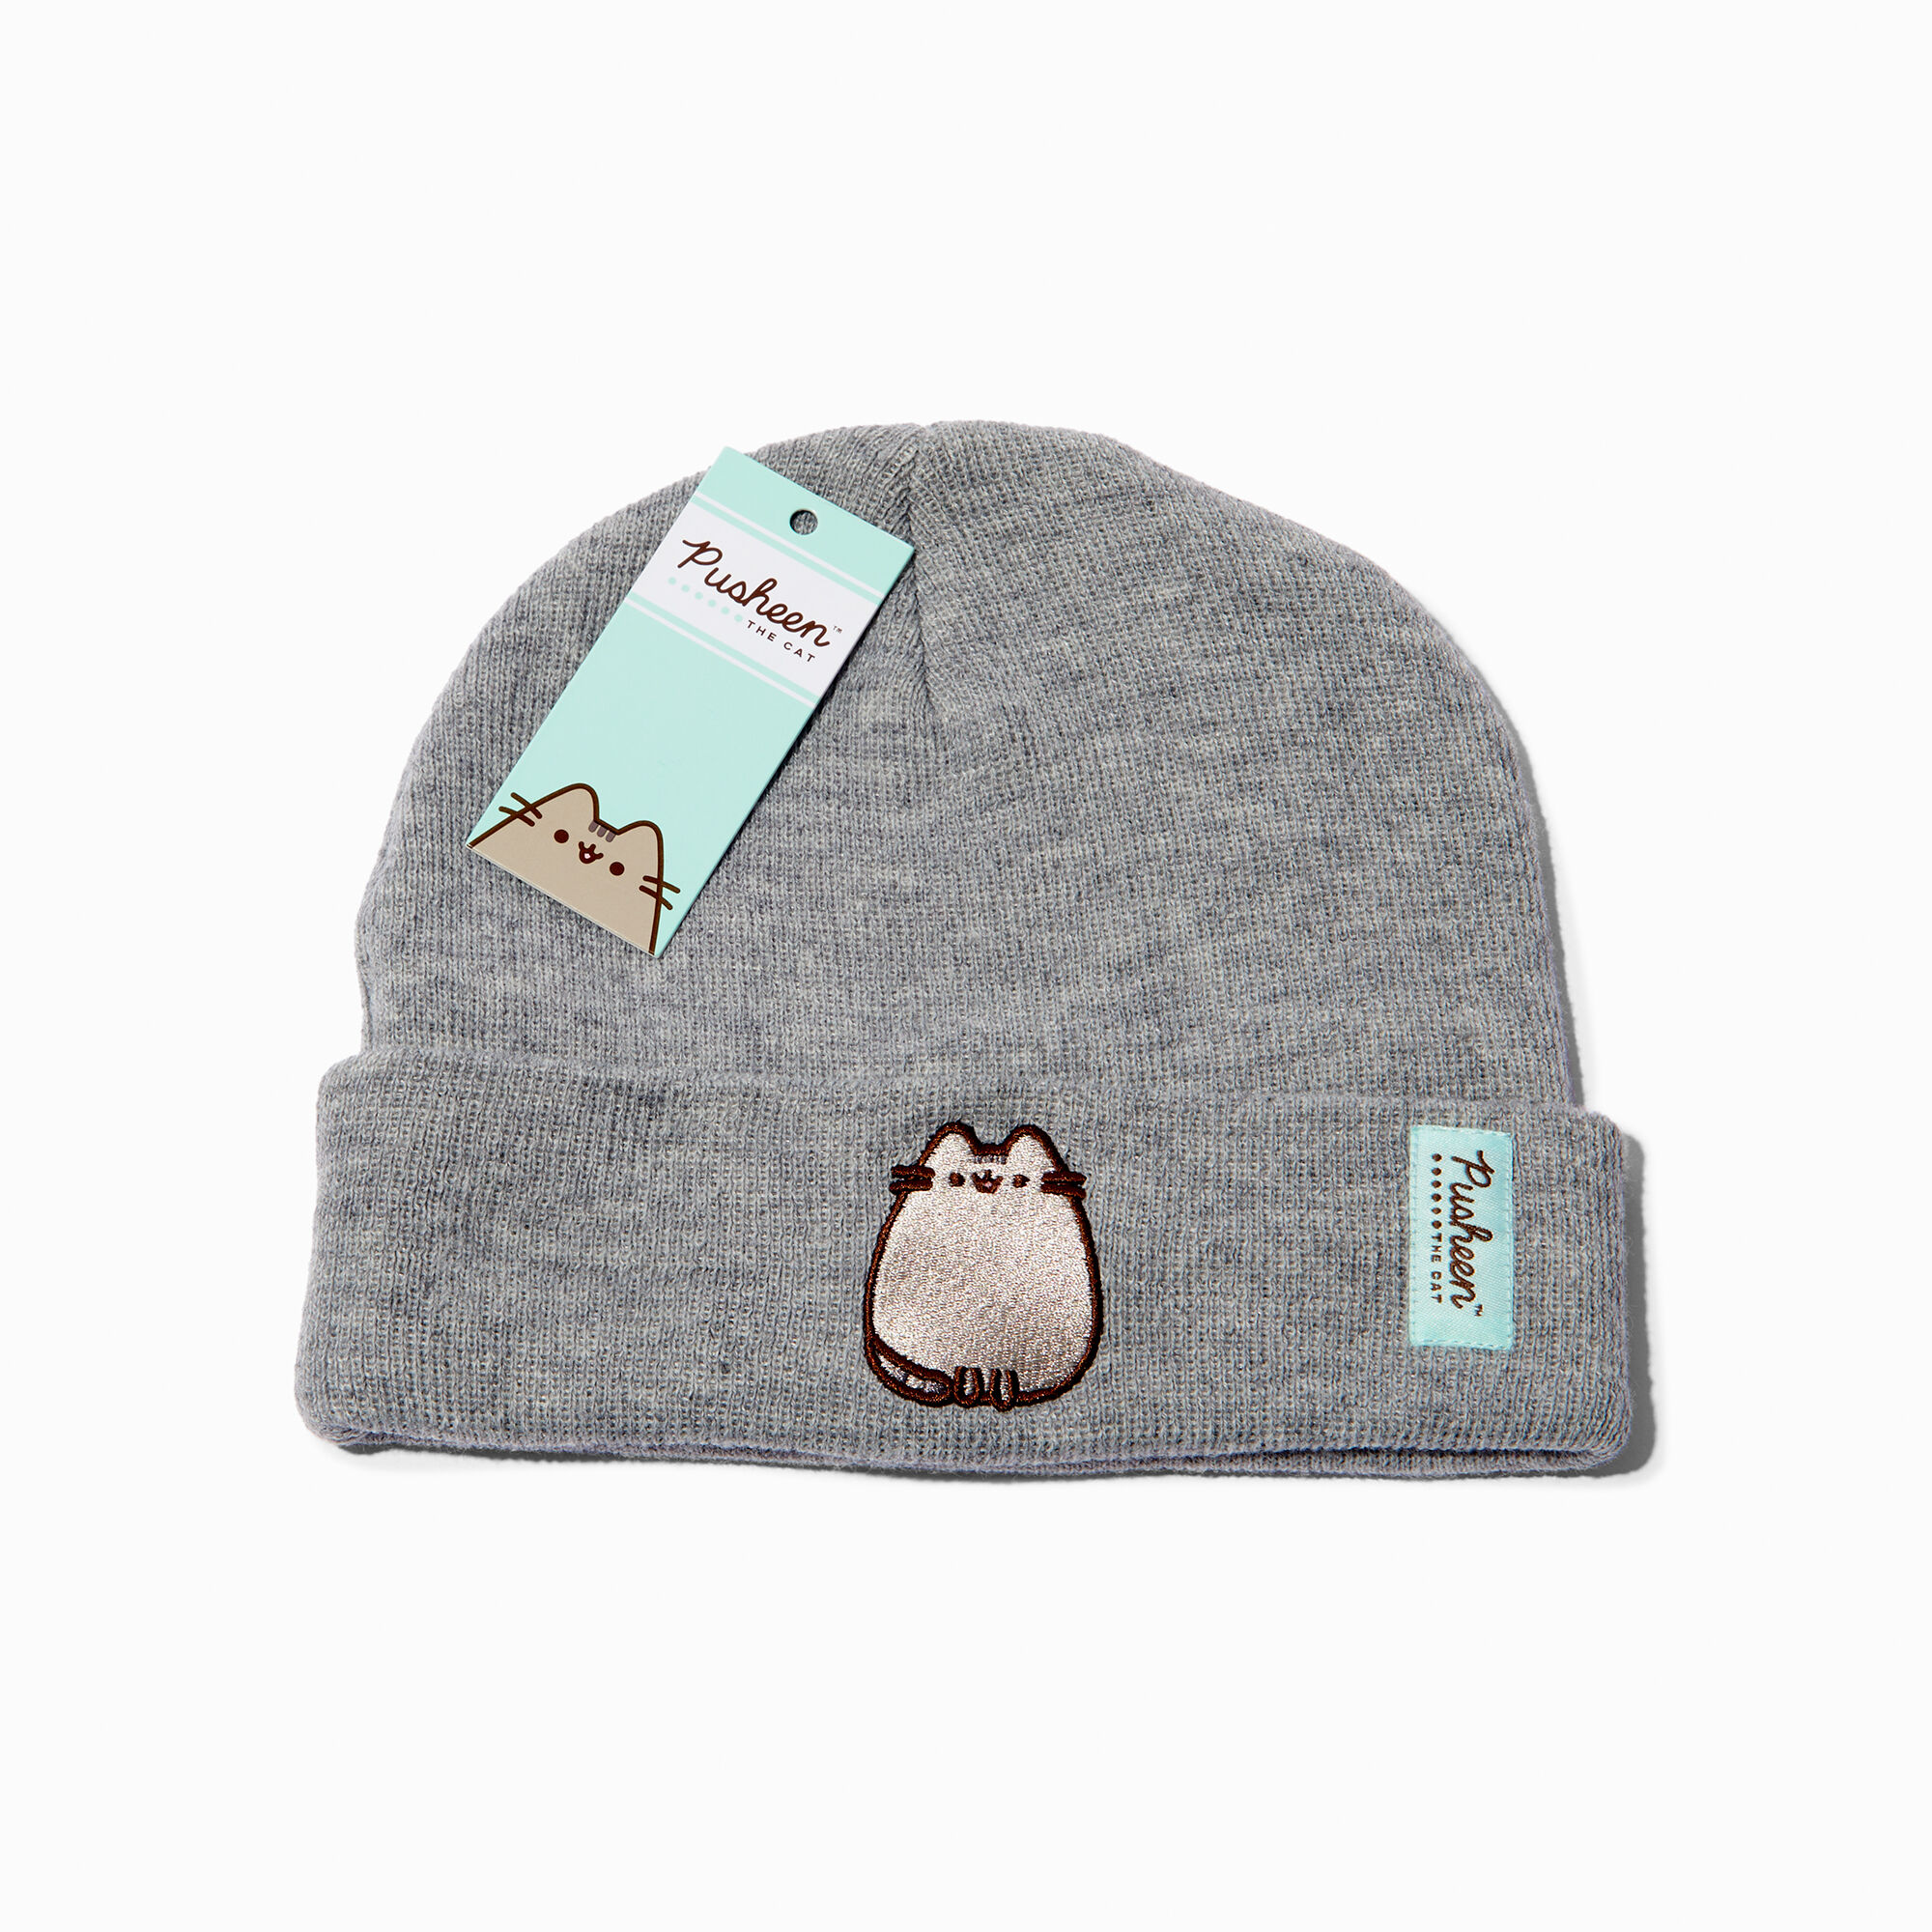 View Claires Pusheen Beanie Hat Grey information